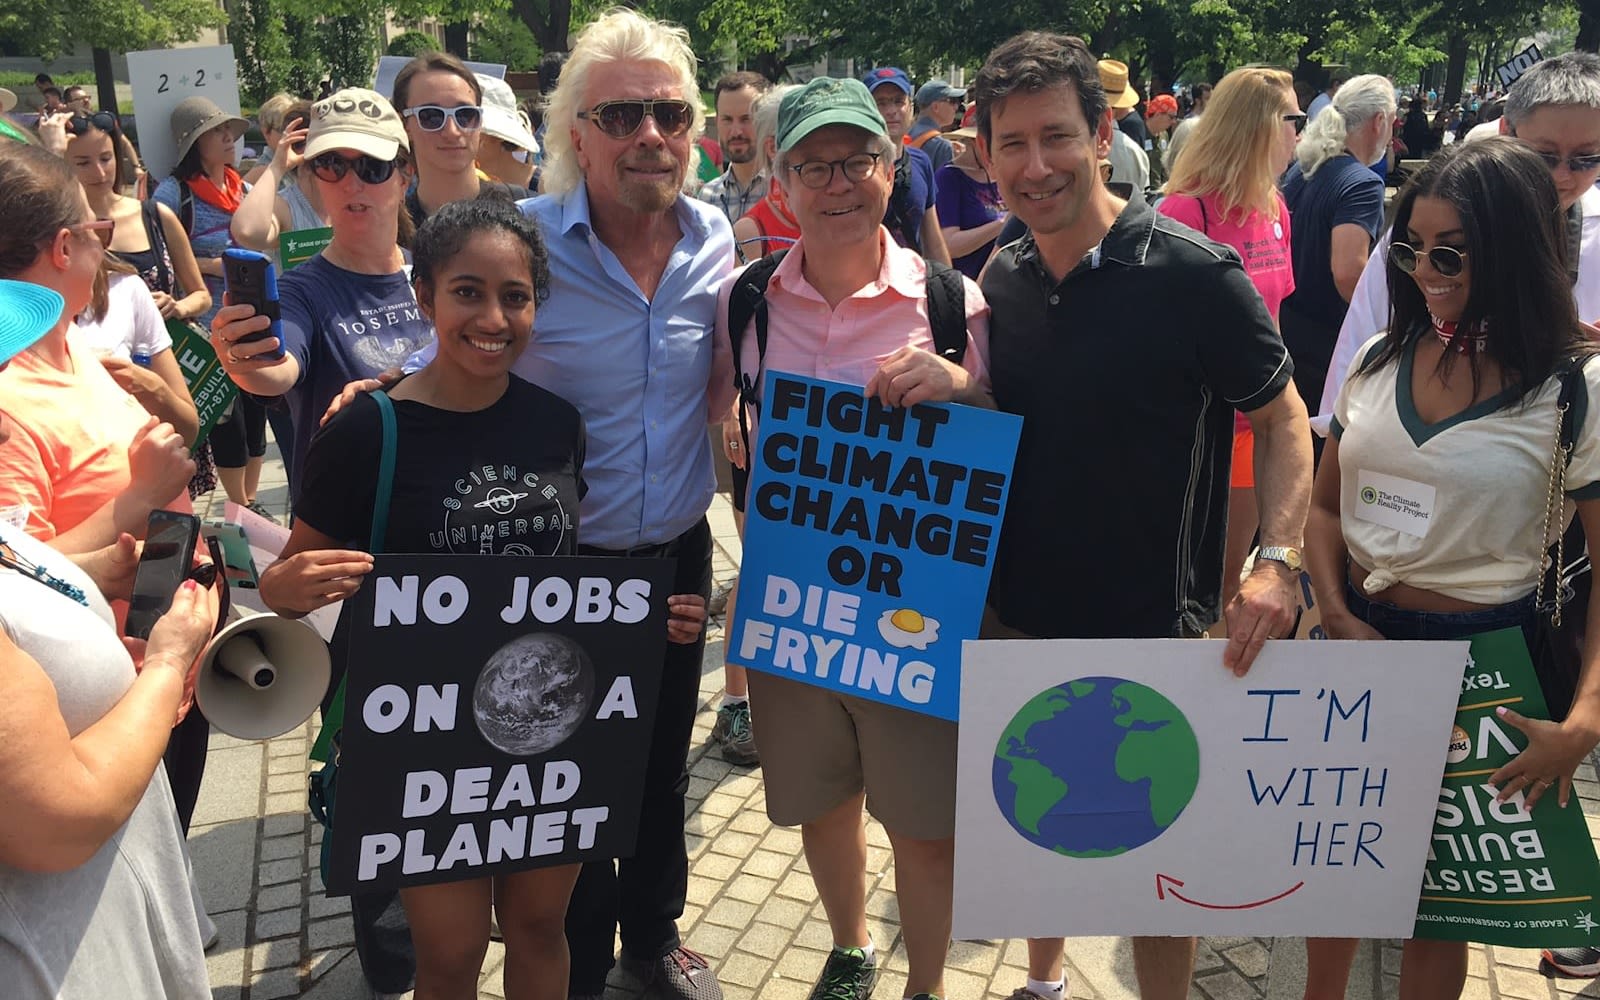 Richard Branson at the climate march in Washington, DC with other marchers